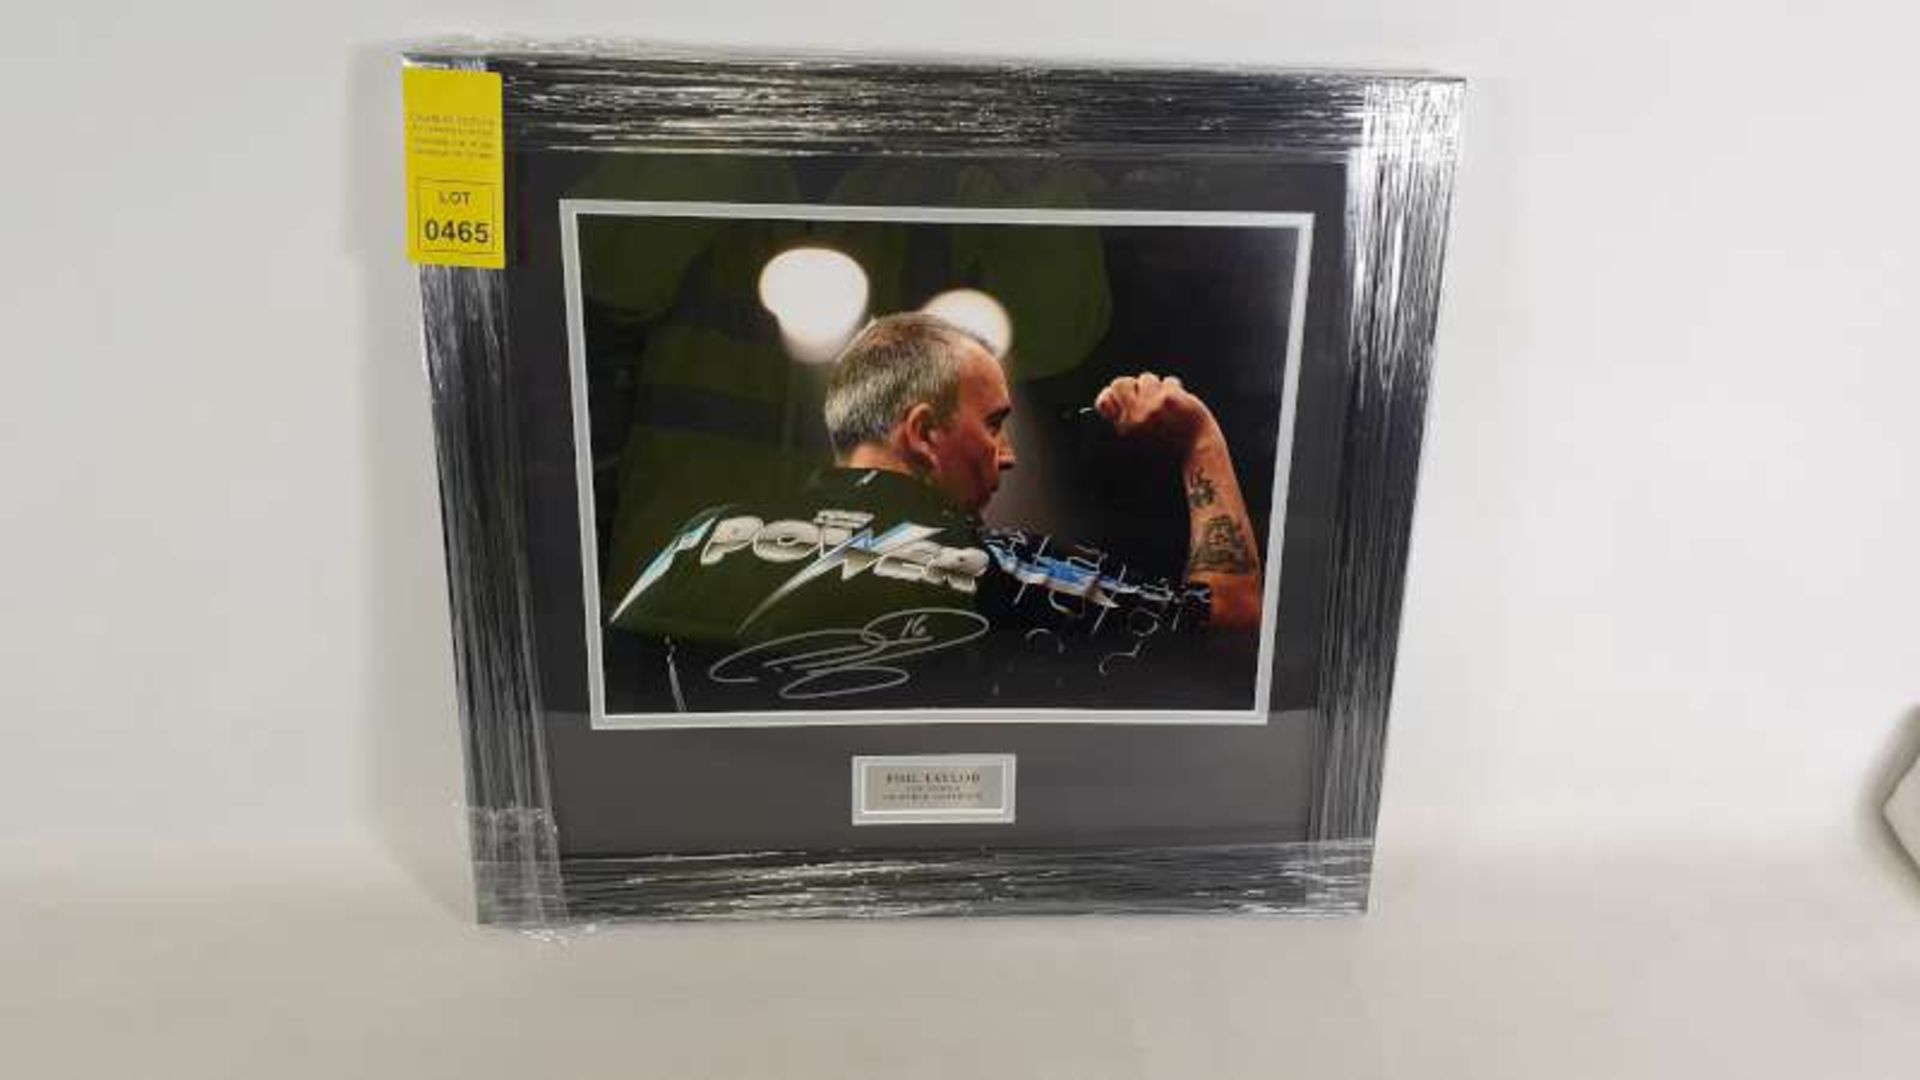 BRAND NEW OFFICIAL FRAMED PHIL THE POWER TAYLOR SIGNED PICTURE WITH CERTIFICATION OF AUTHENTICITY